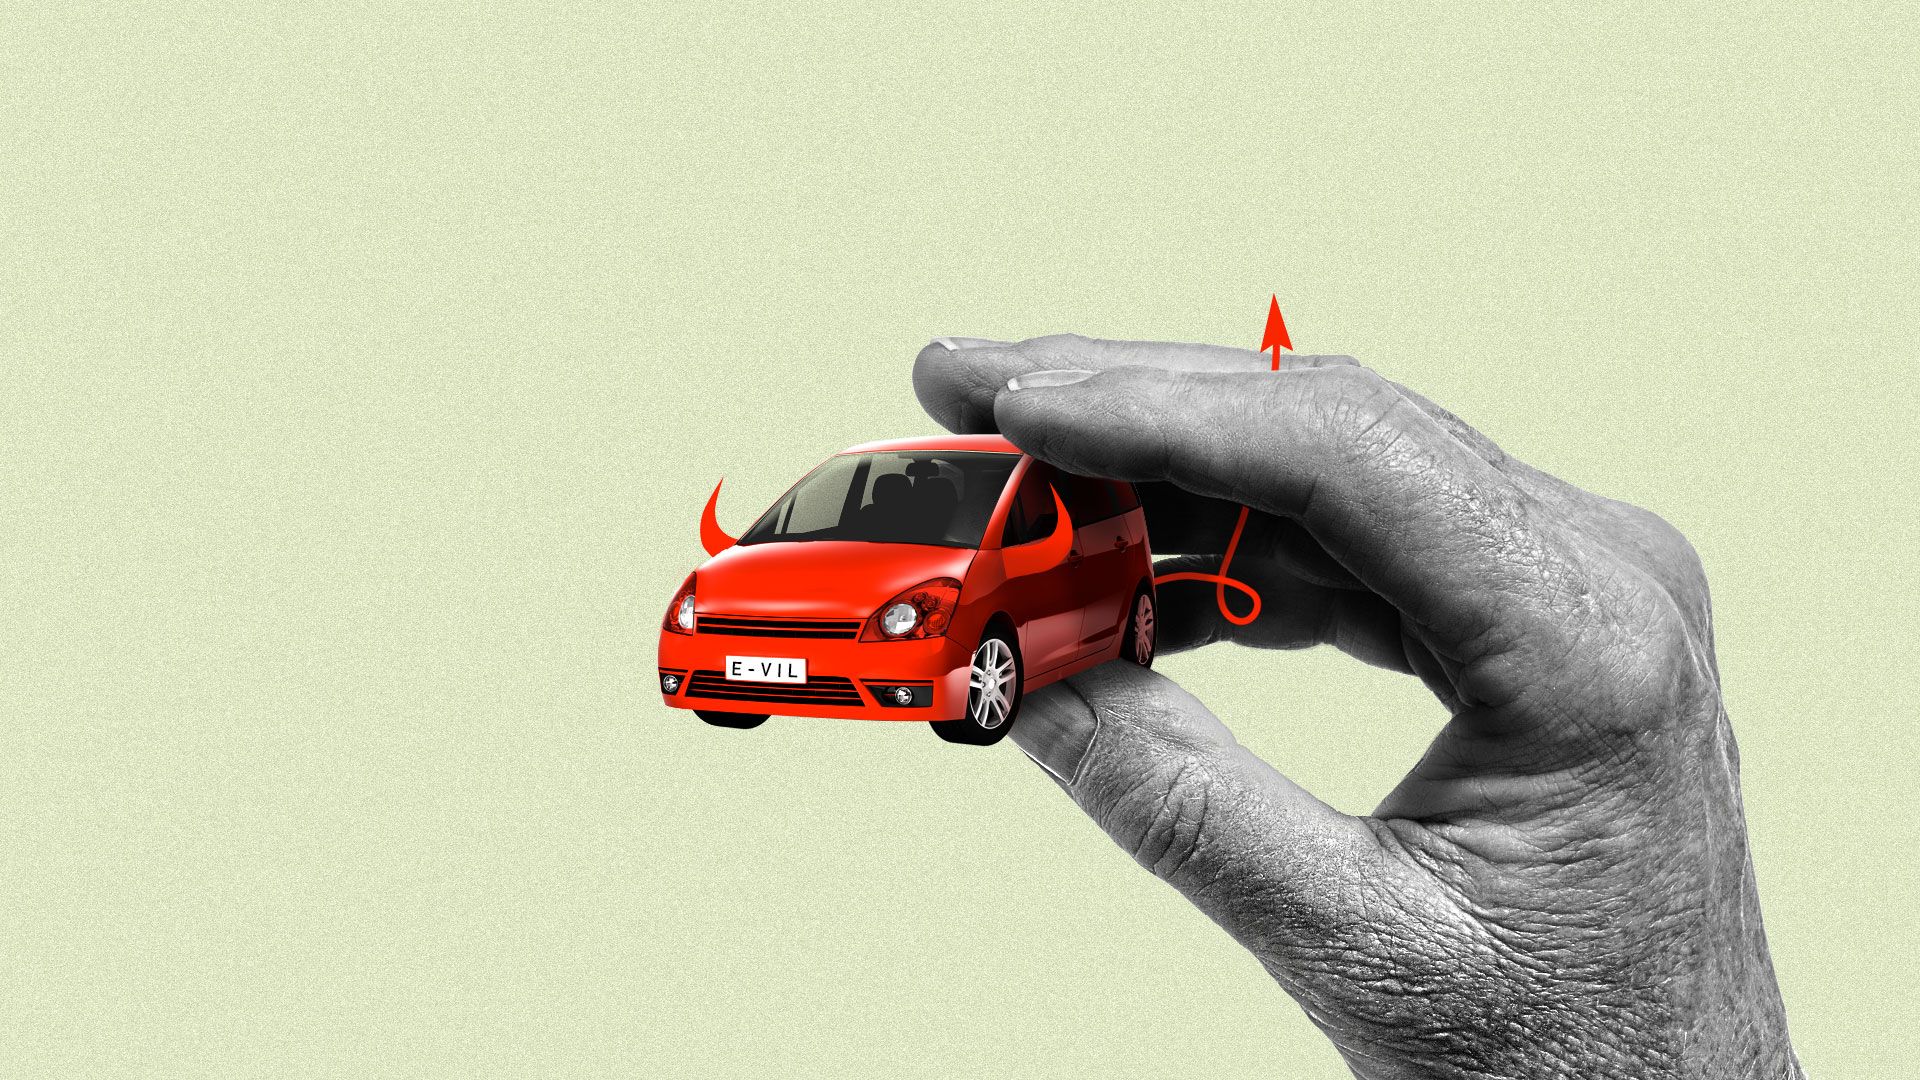 A hand holding up an evil small car